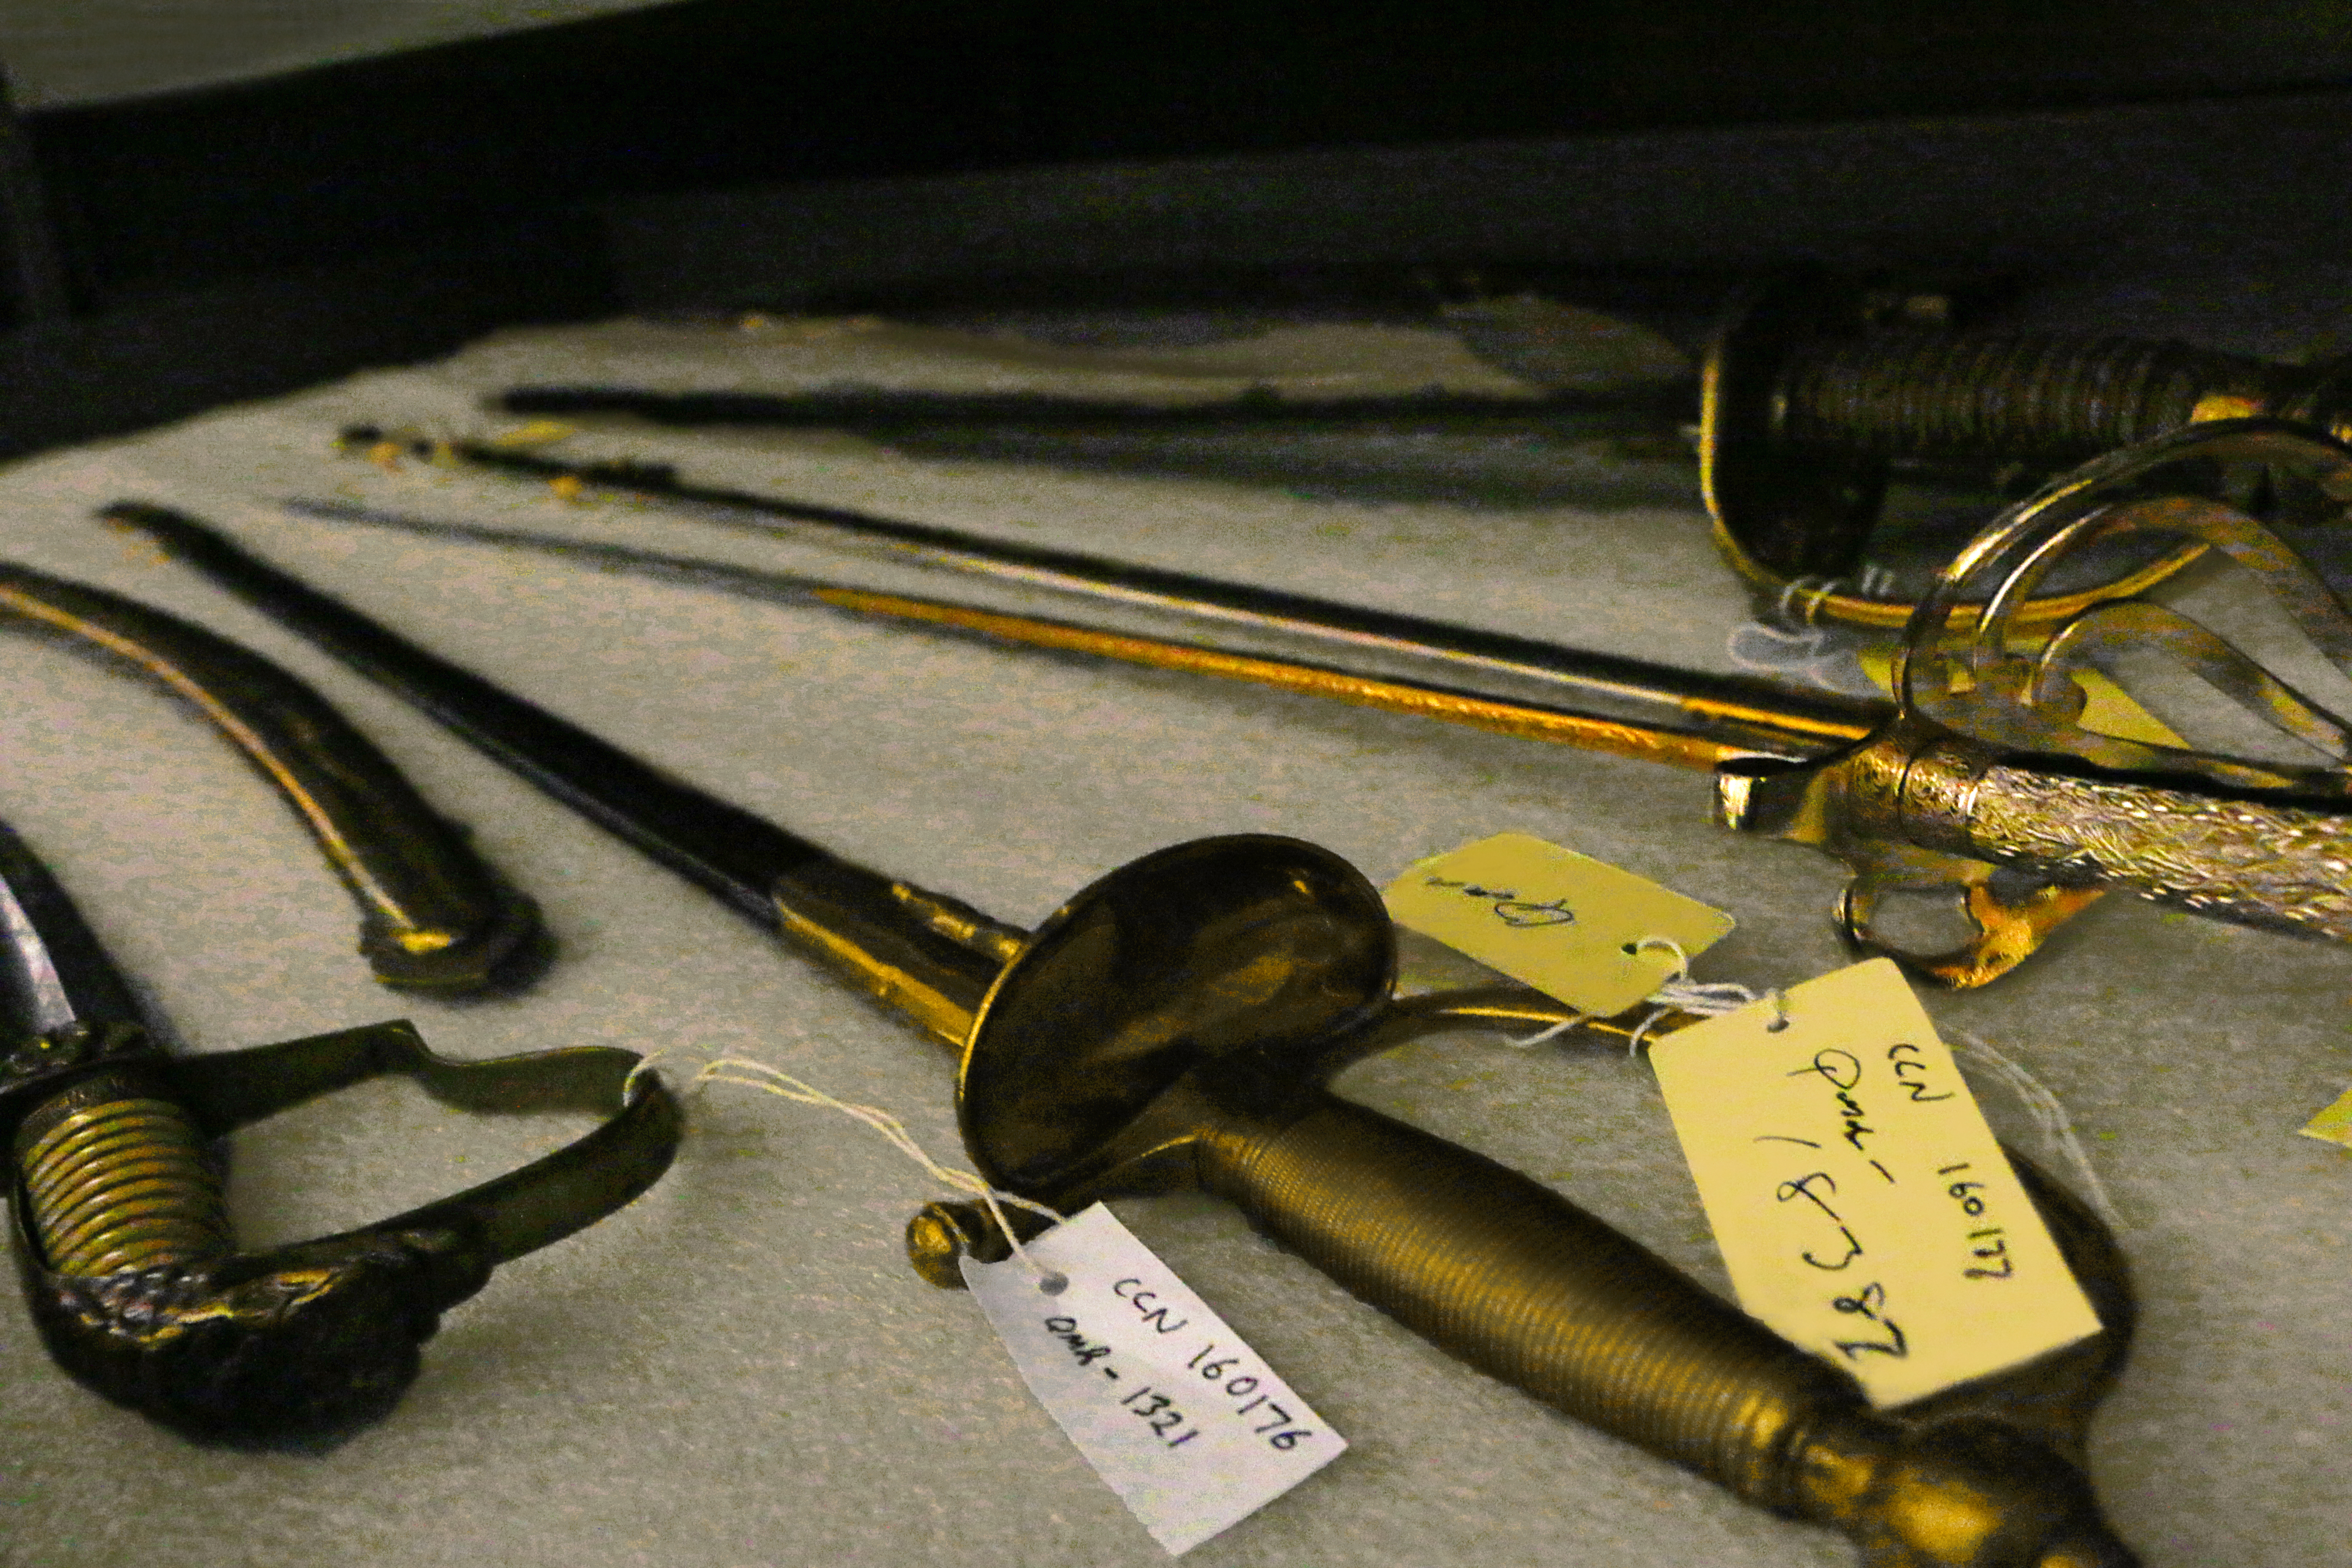 Swords in a collections case